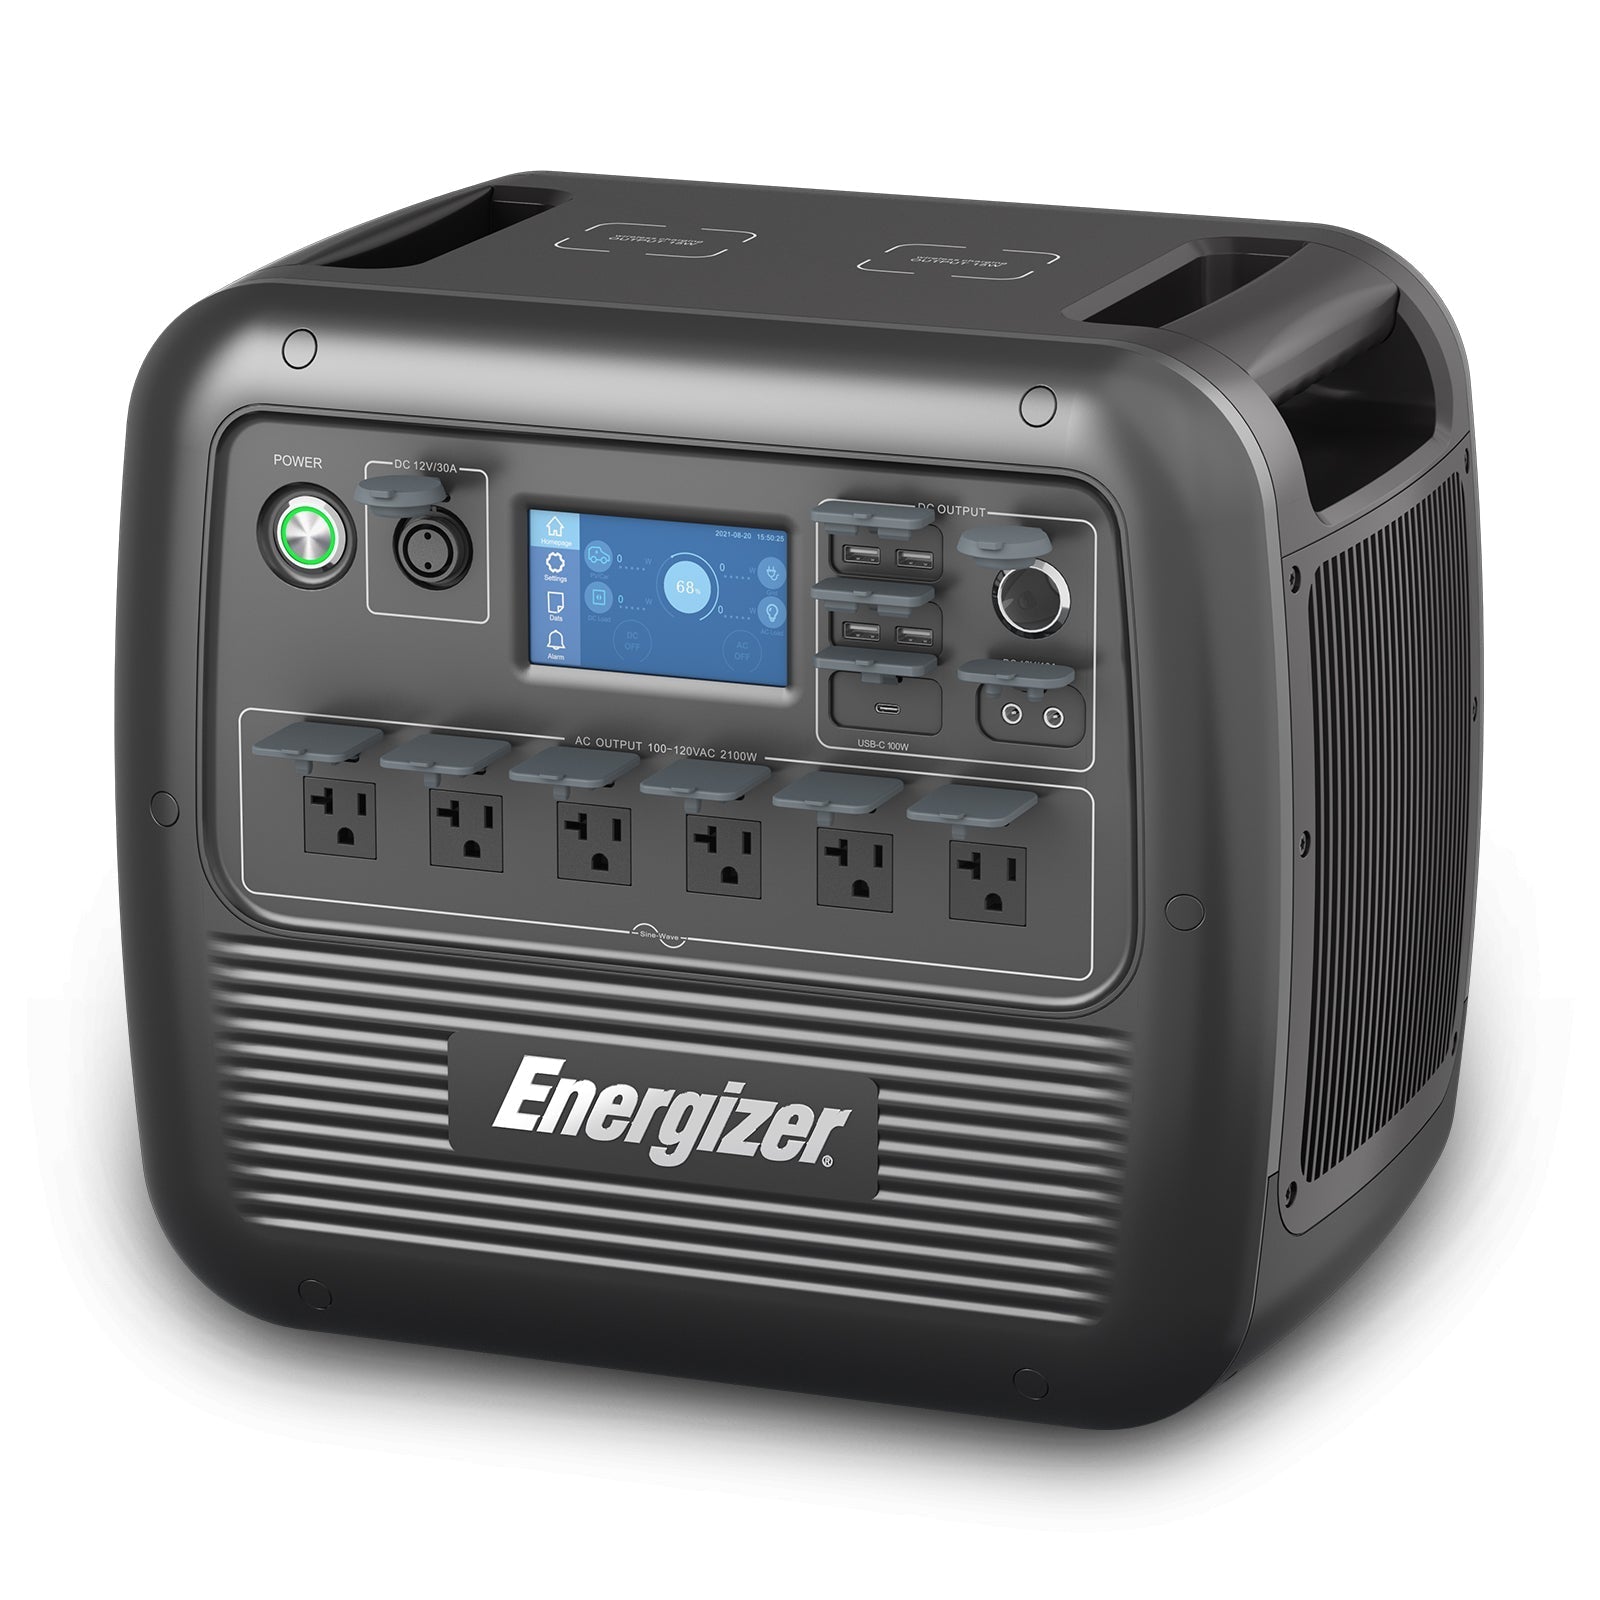 Energizer PPS2000